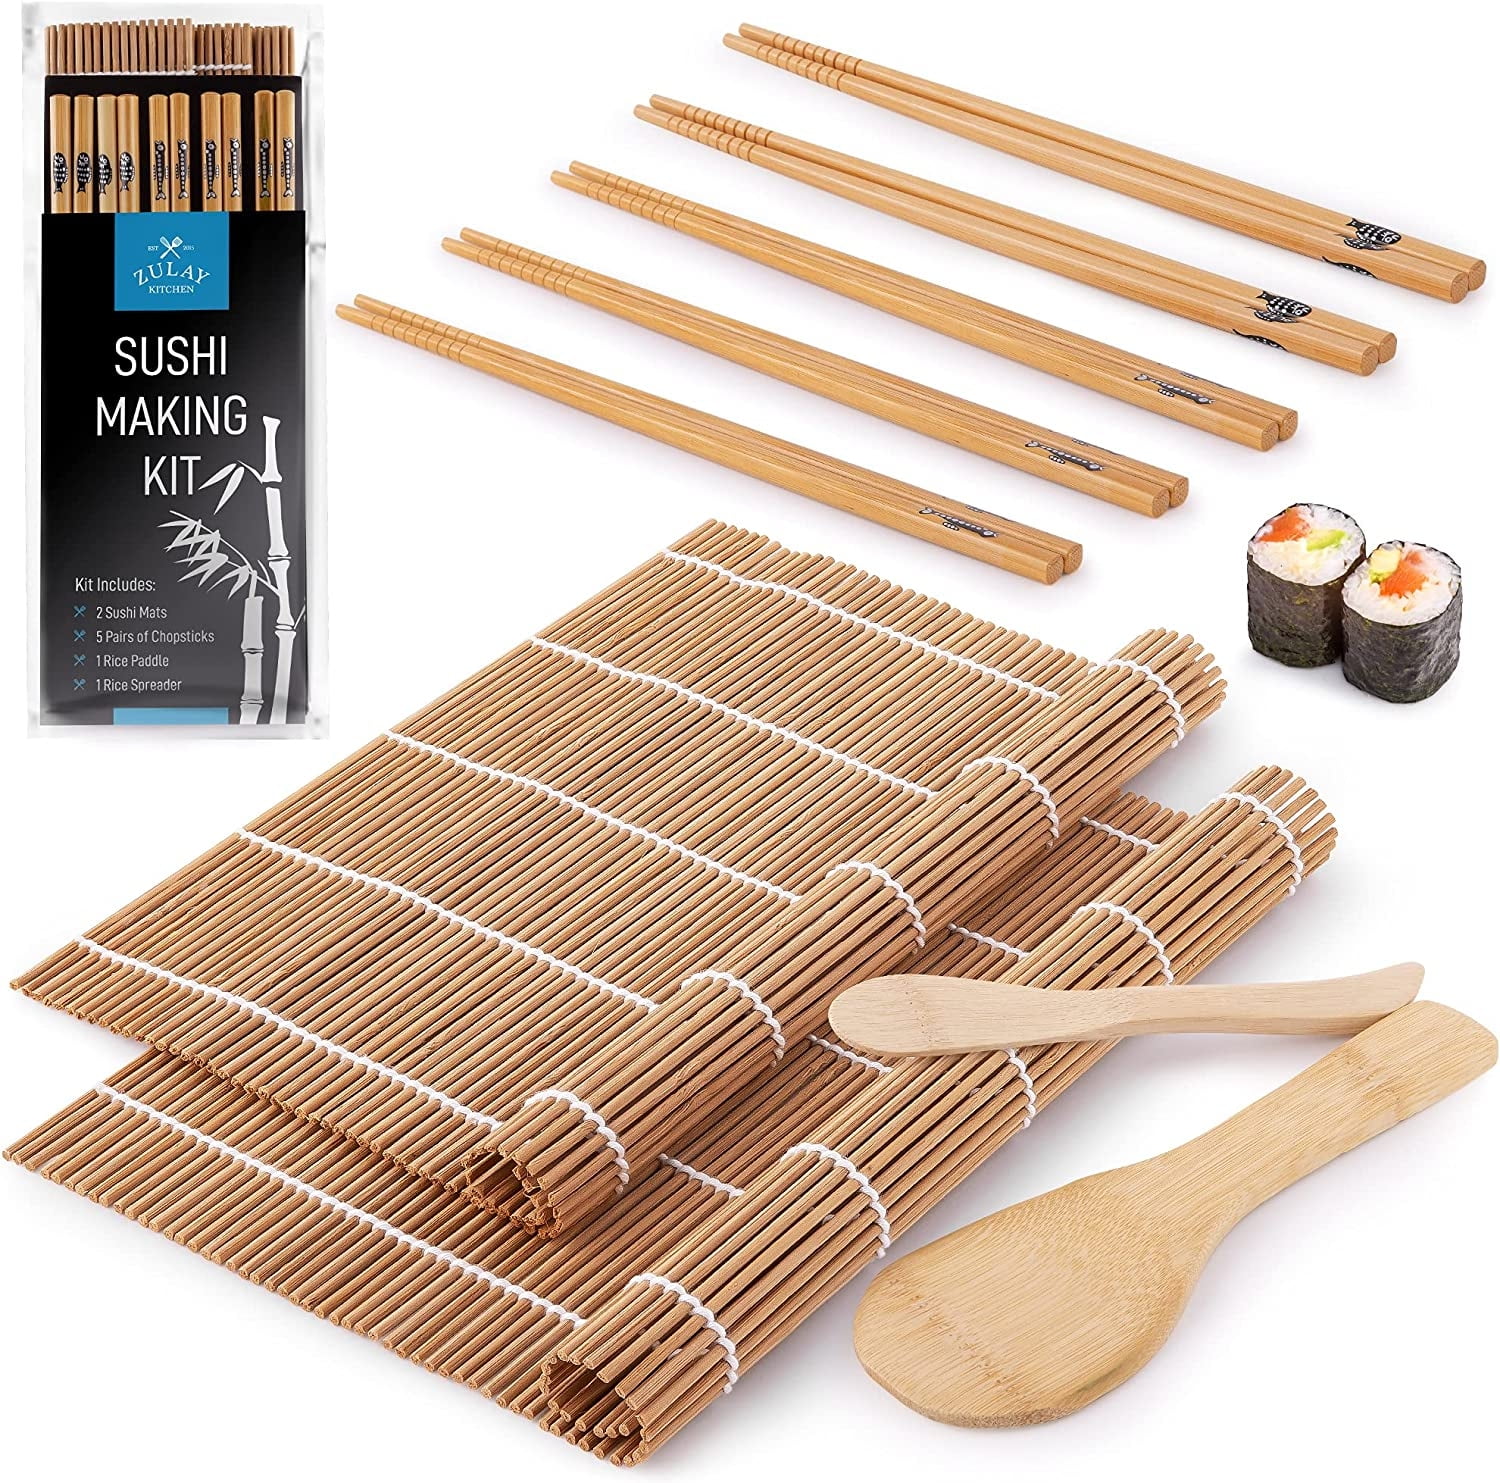 Sushi Making Kit, Sushi Roller Set, All In One Sushi Maker Kit, With Bamboo  Rolling Mat, Sushi Bazooka, Chopsticks Holders, Rice Paddle, Avocado Slicer  For Beginners, Family, Friends, Home, Kitchen Stuff, 